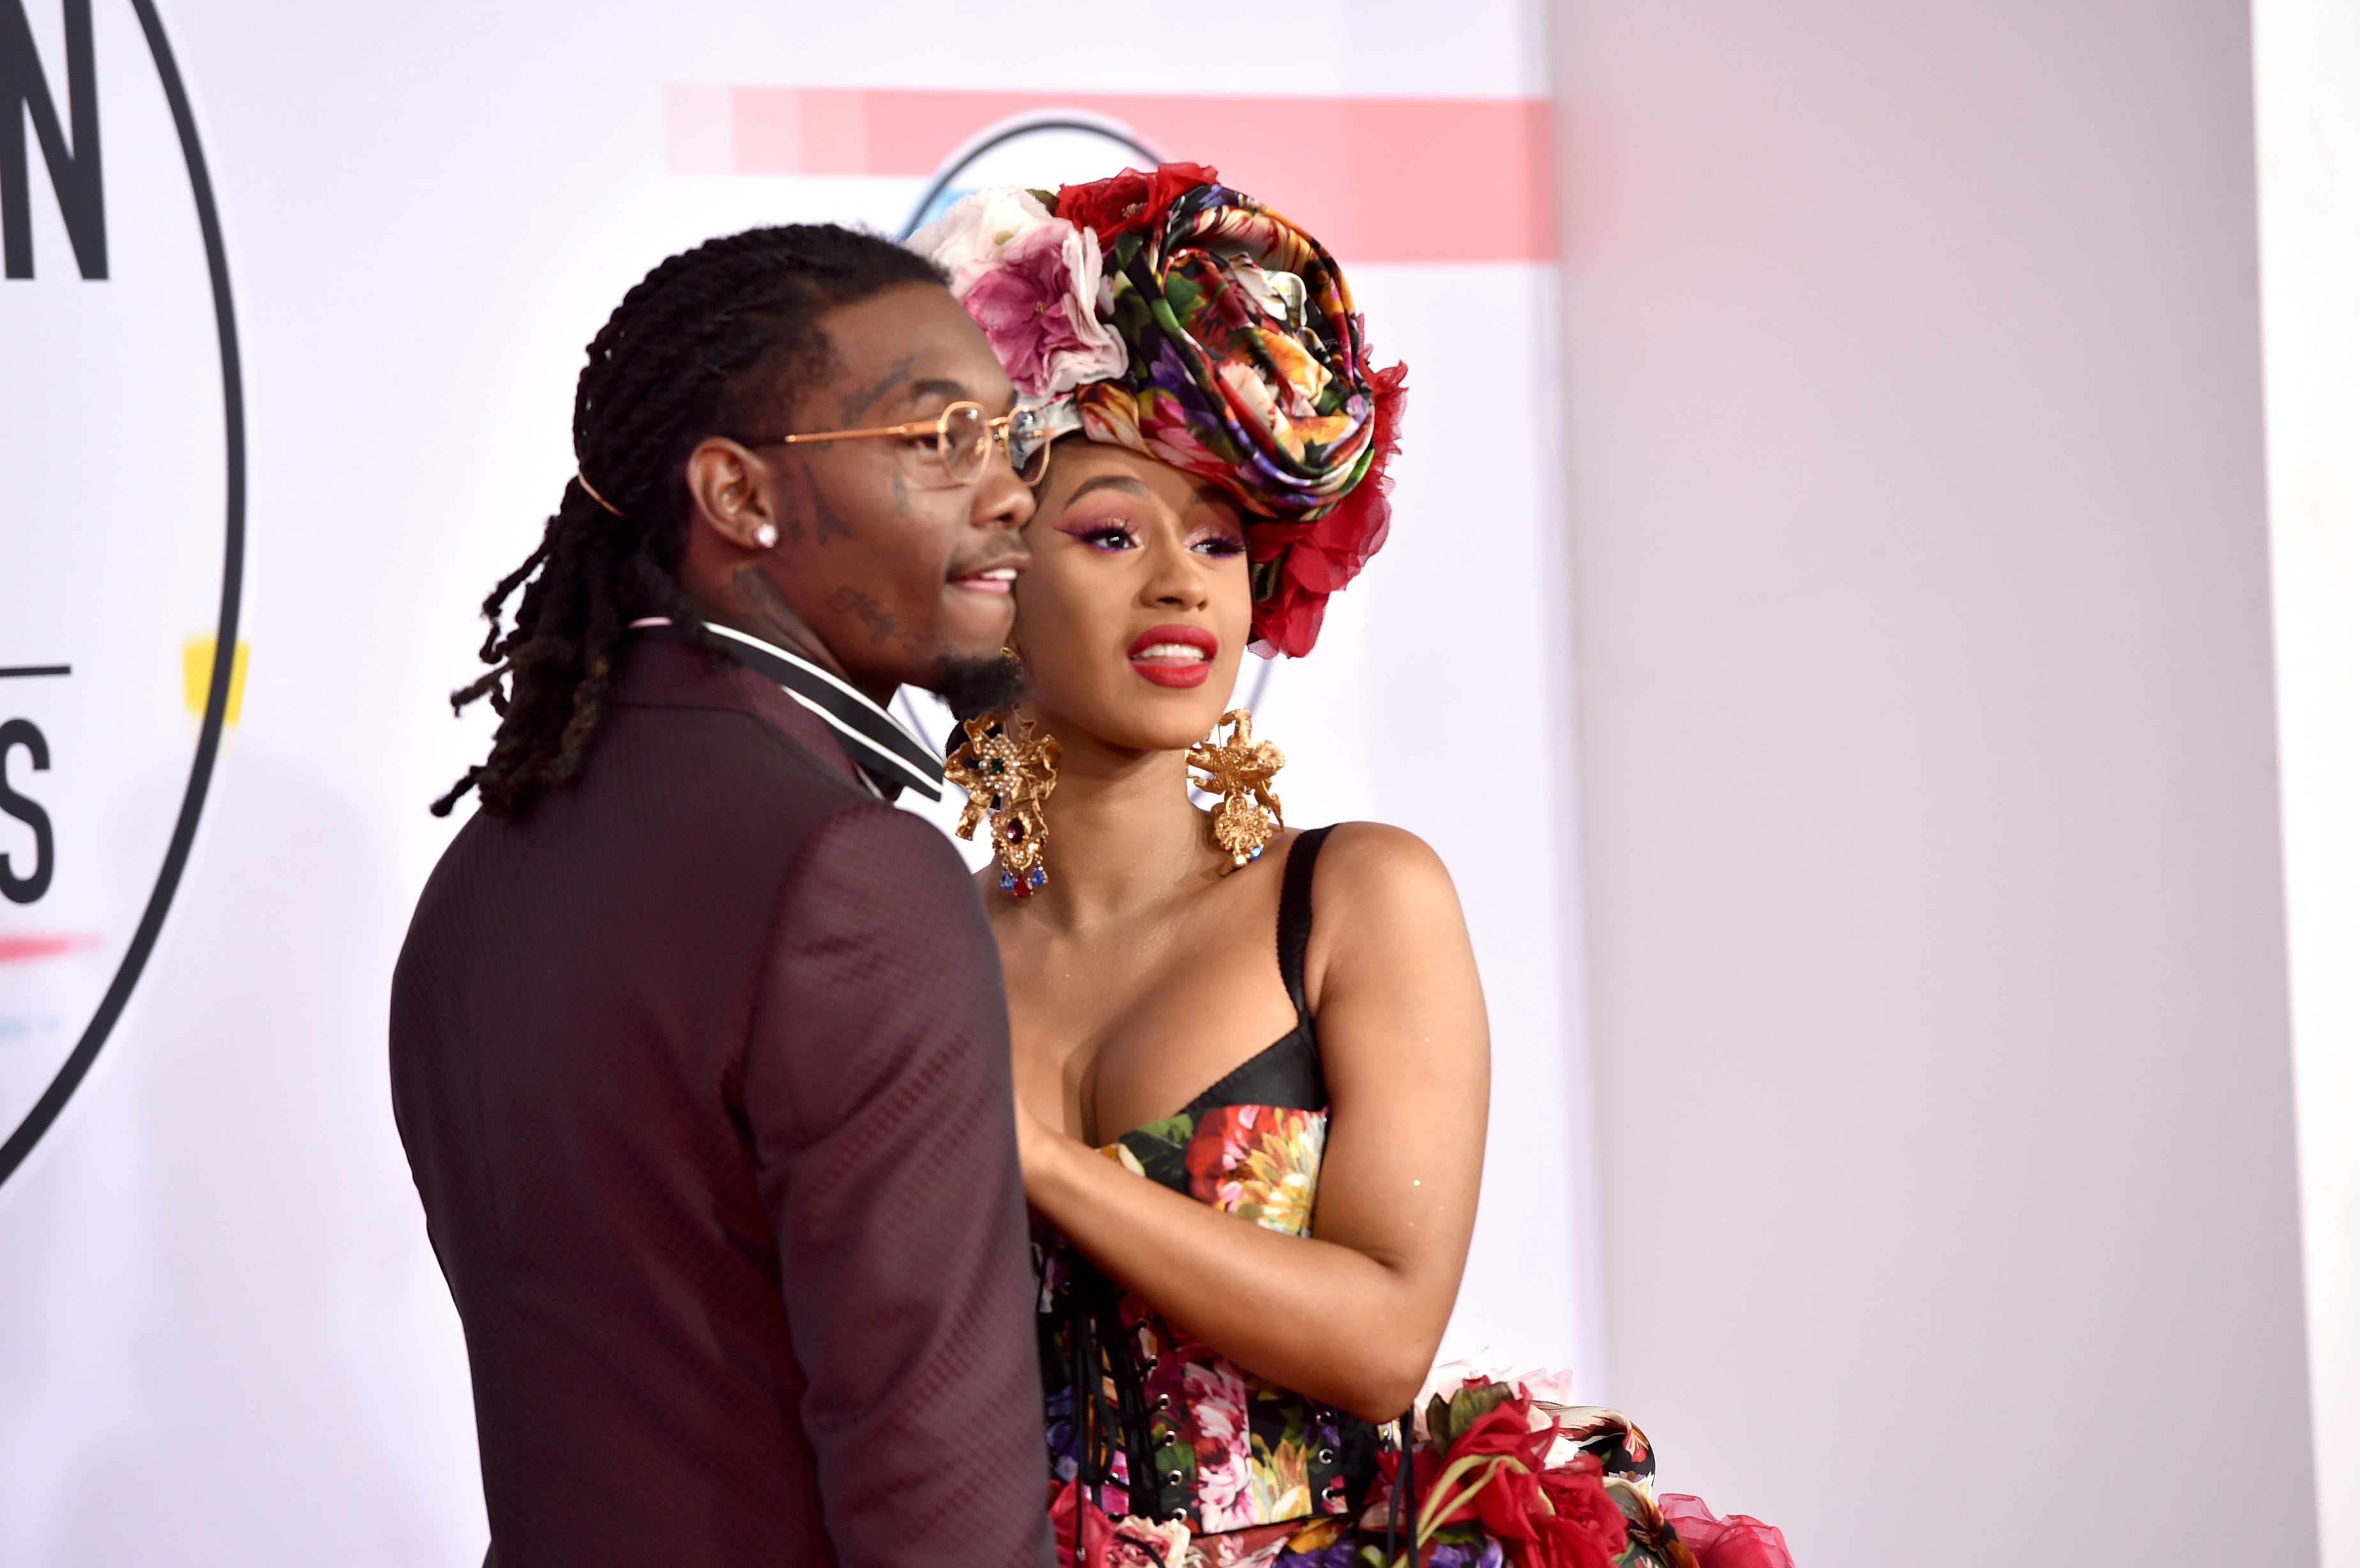 Offset and Cardi B at the 2018 American Music Awards on October 9, 2018 in Los Angeles, California. | Source: Getty Images